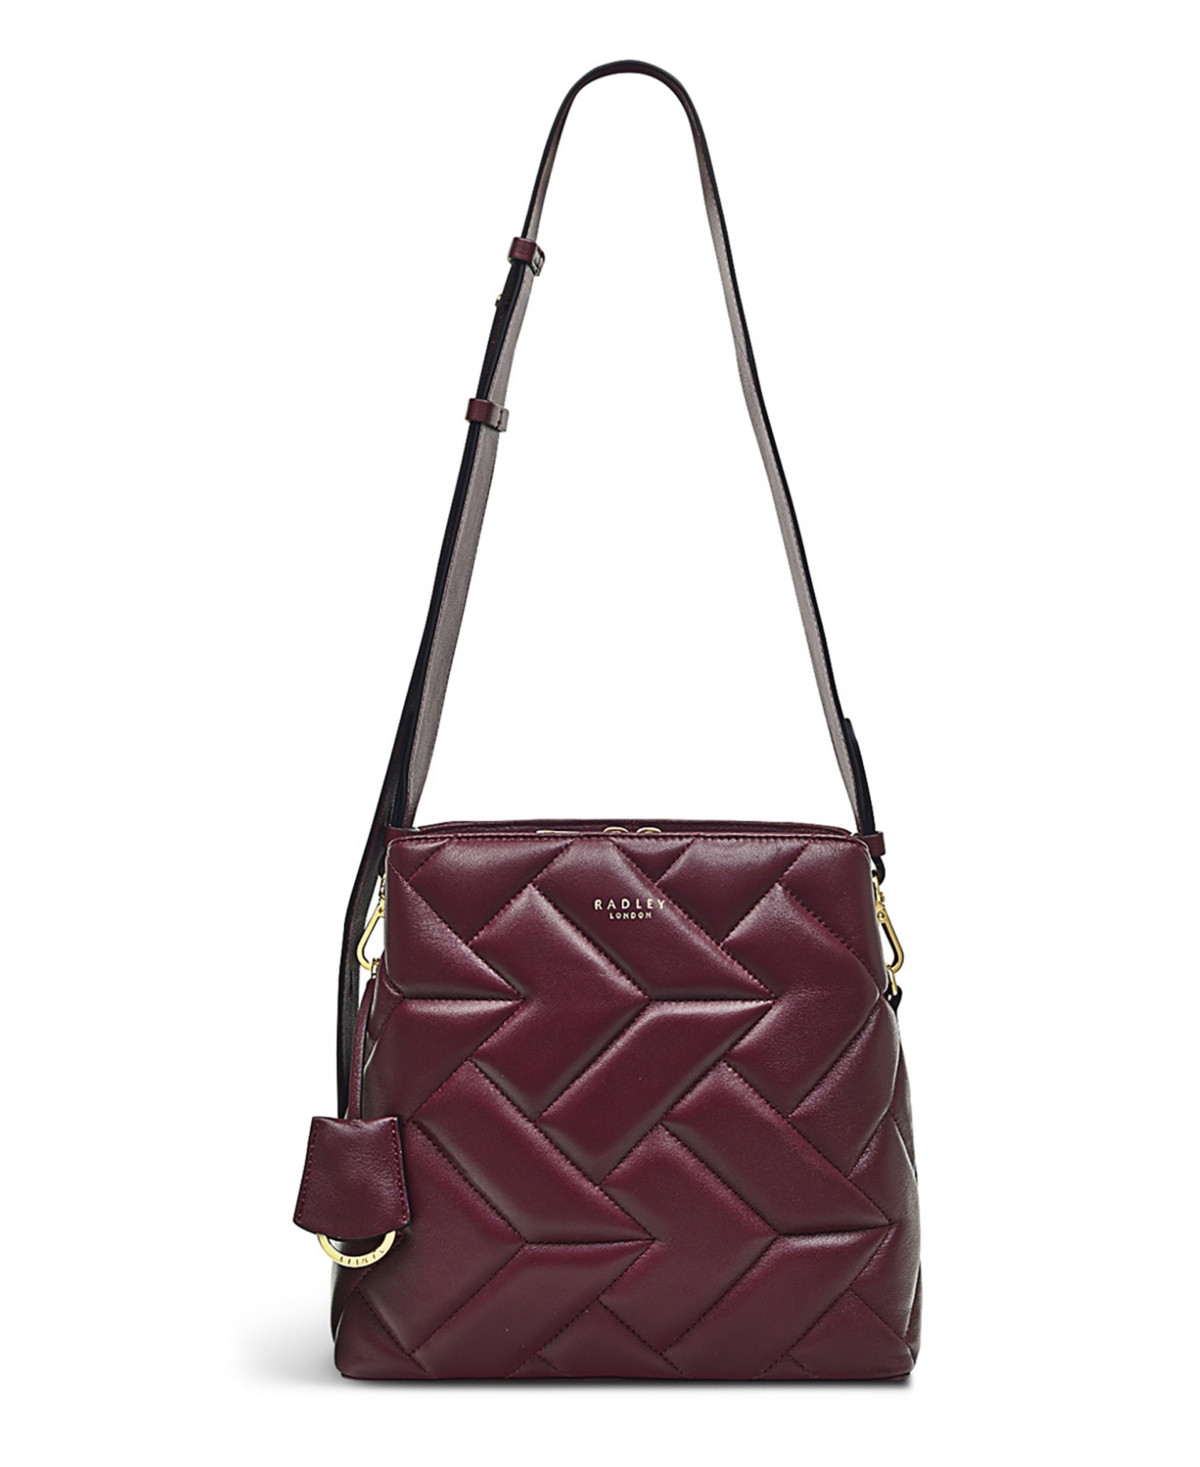 Radley London Dukes Place Small Compartment Leather Crossbody In Dark Cherry